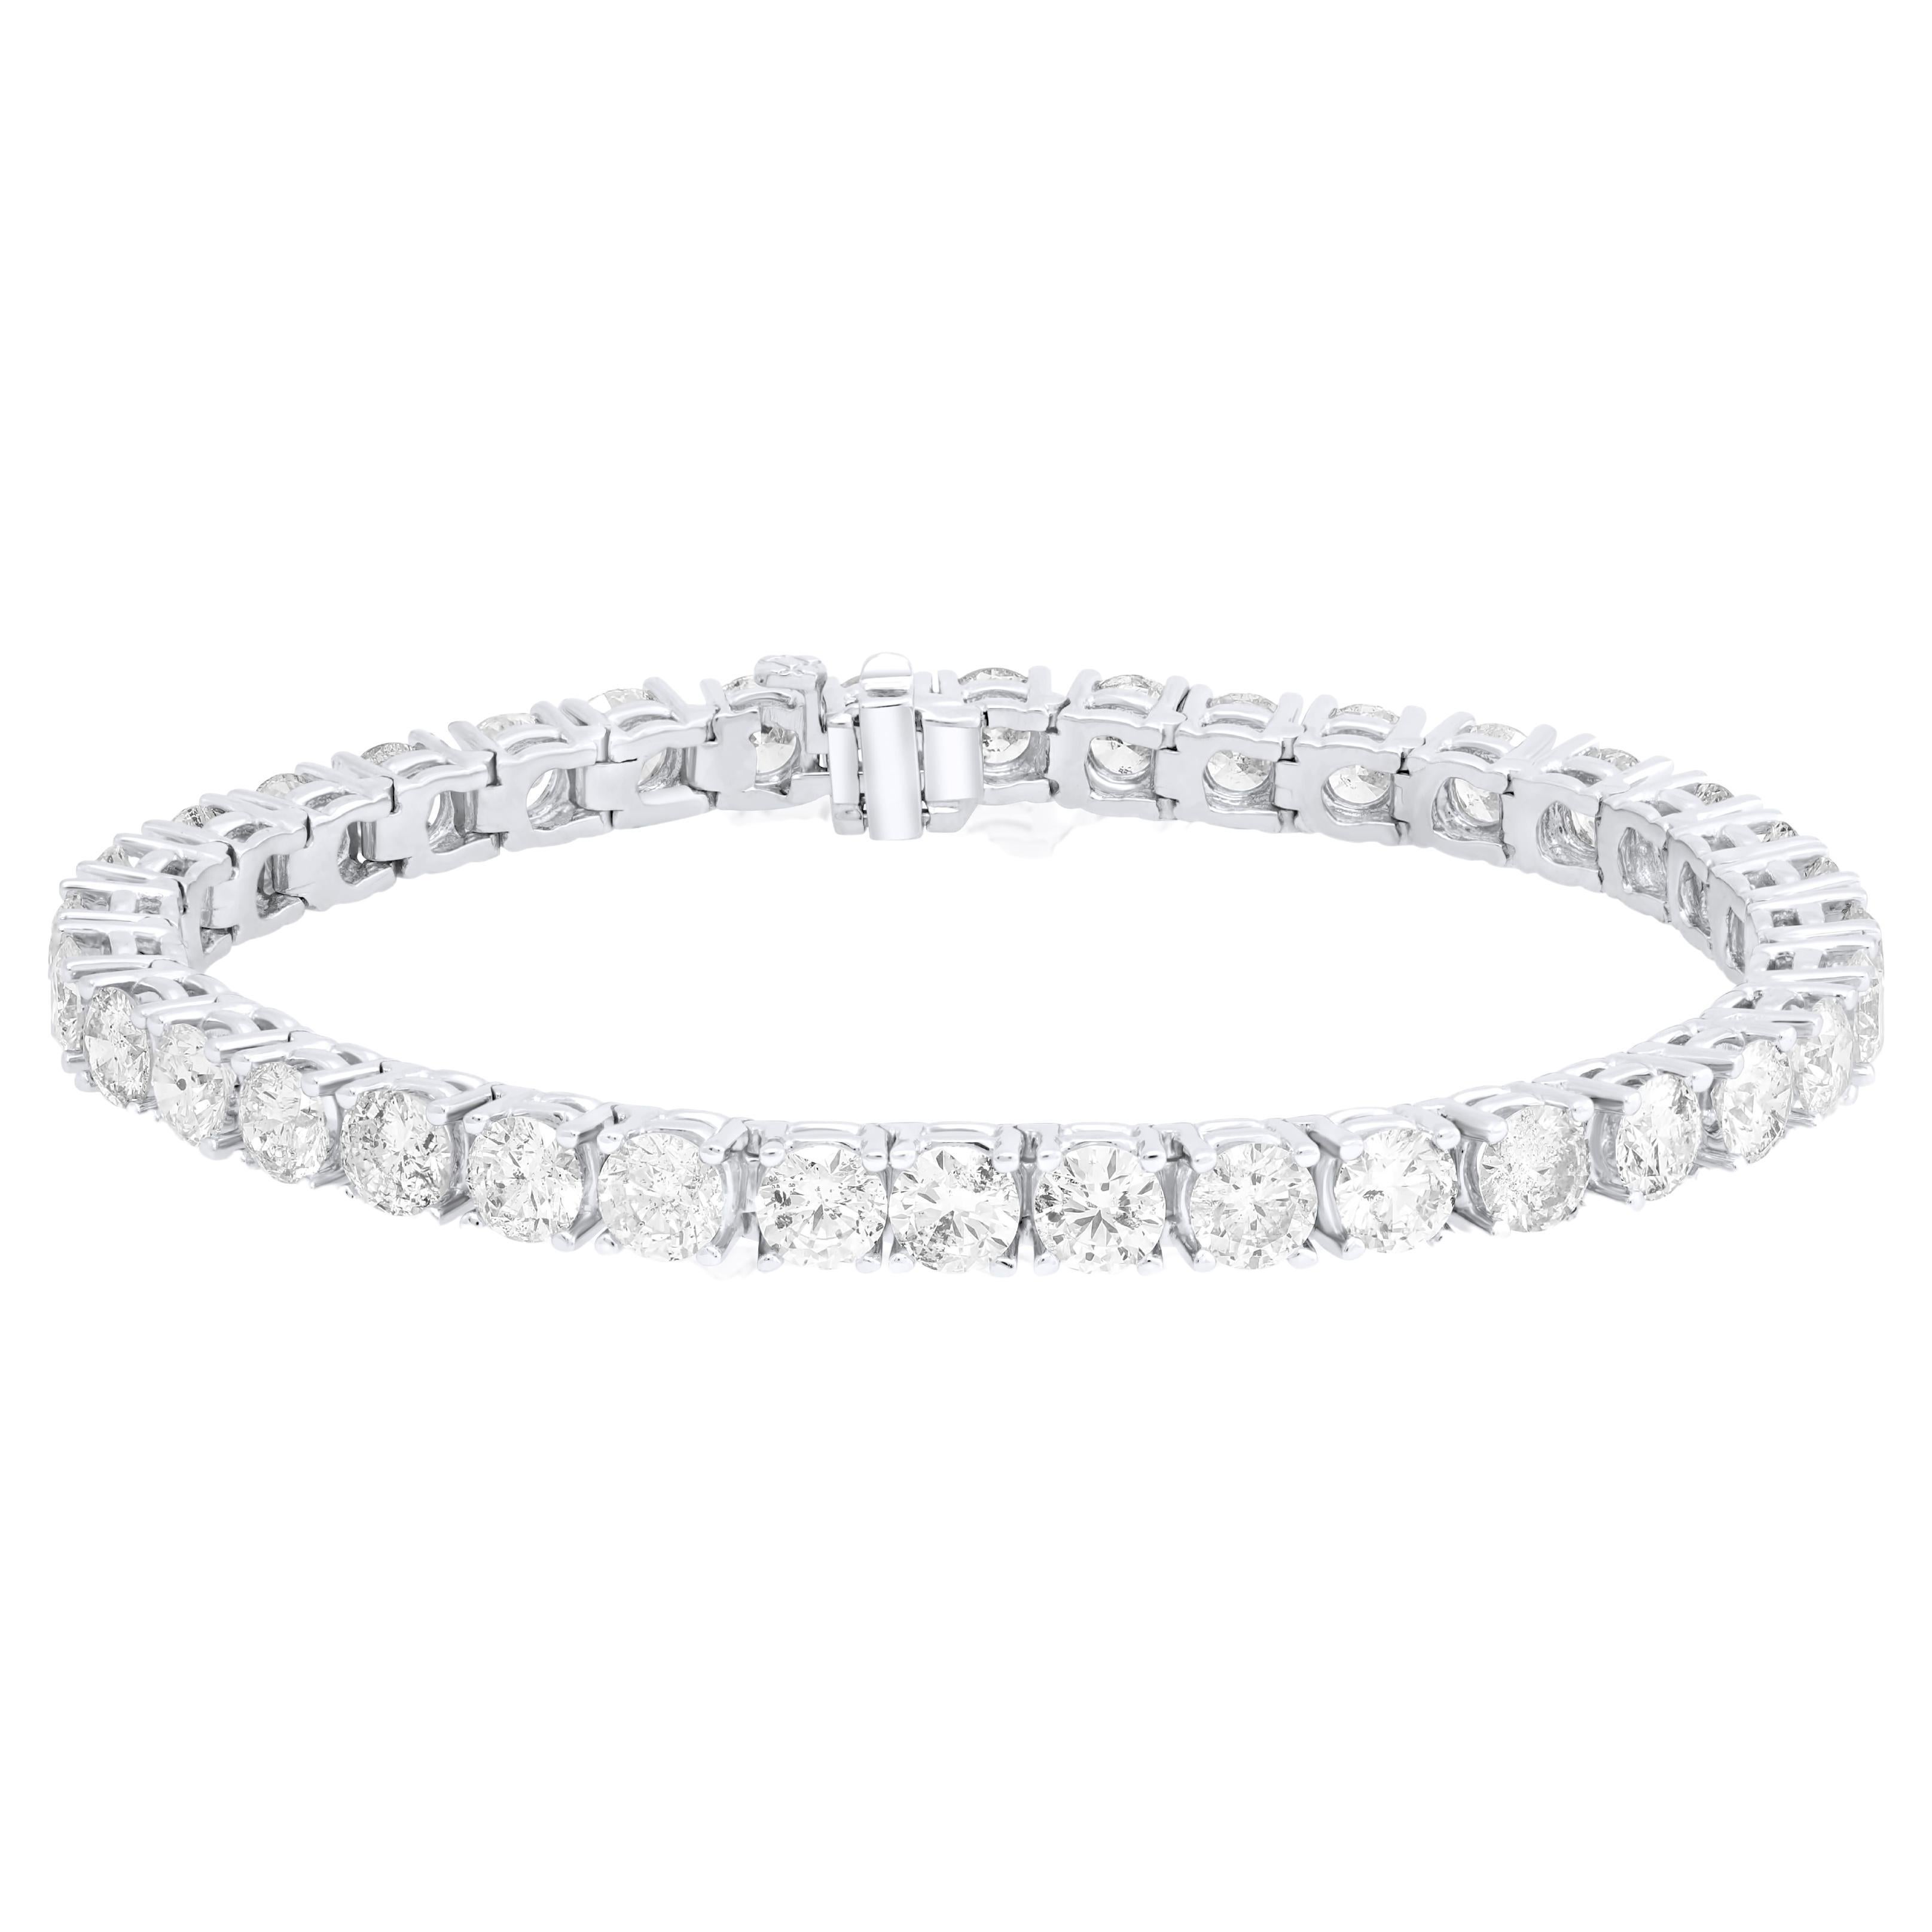 Diana M. 18 kt white gold 4 prong diamond tennis bracelet adorned with 15.85 cts